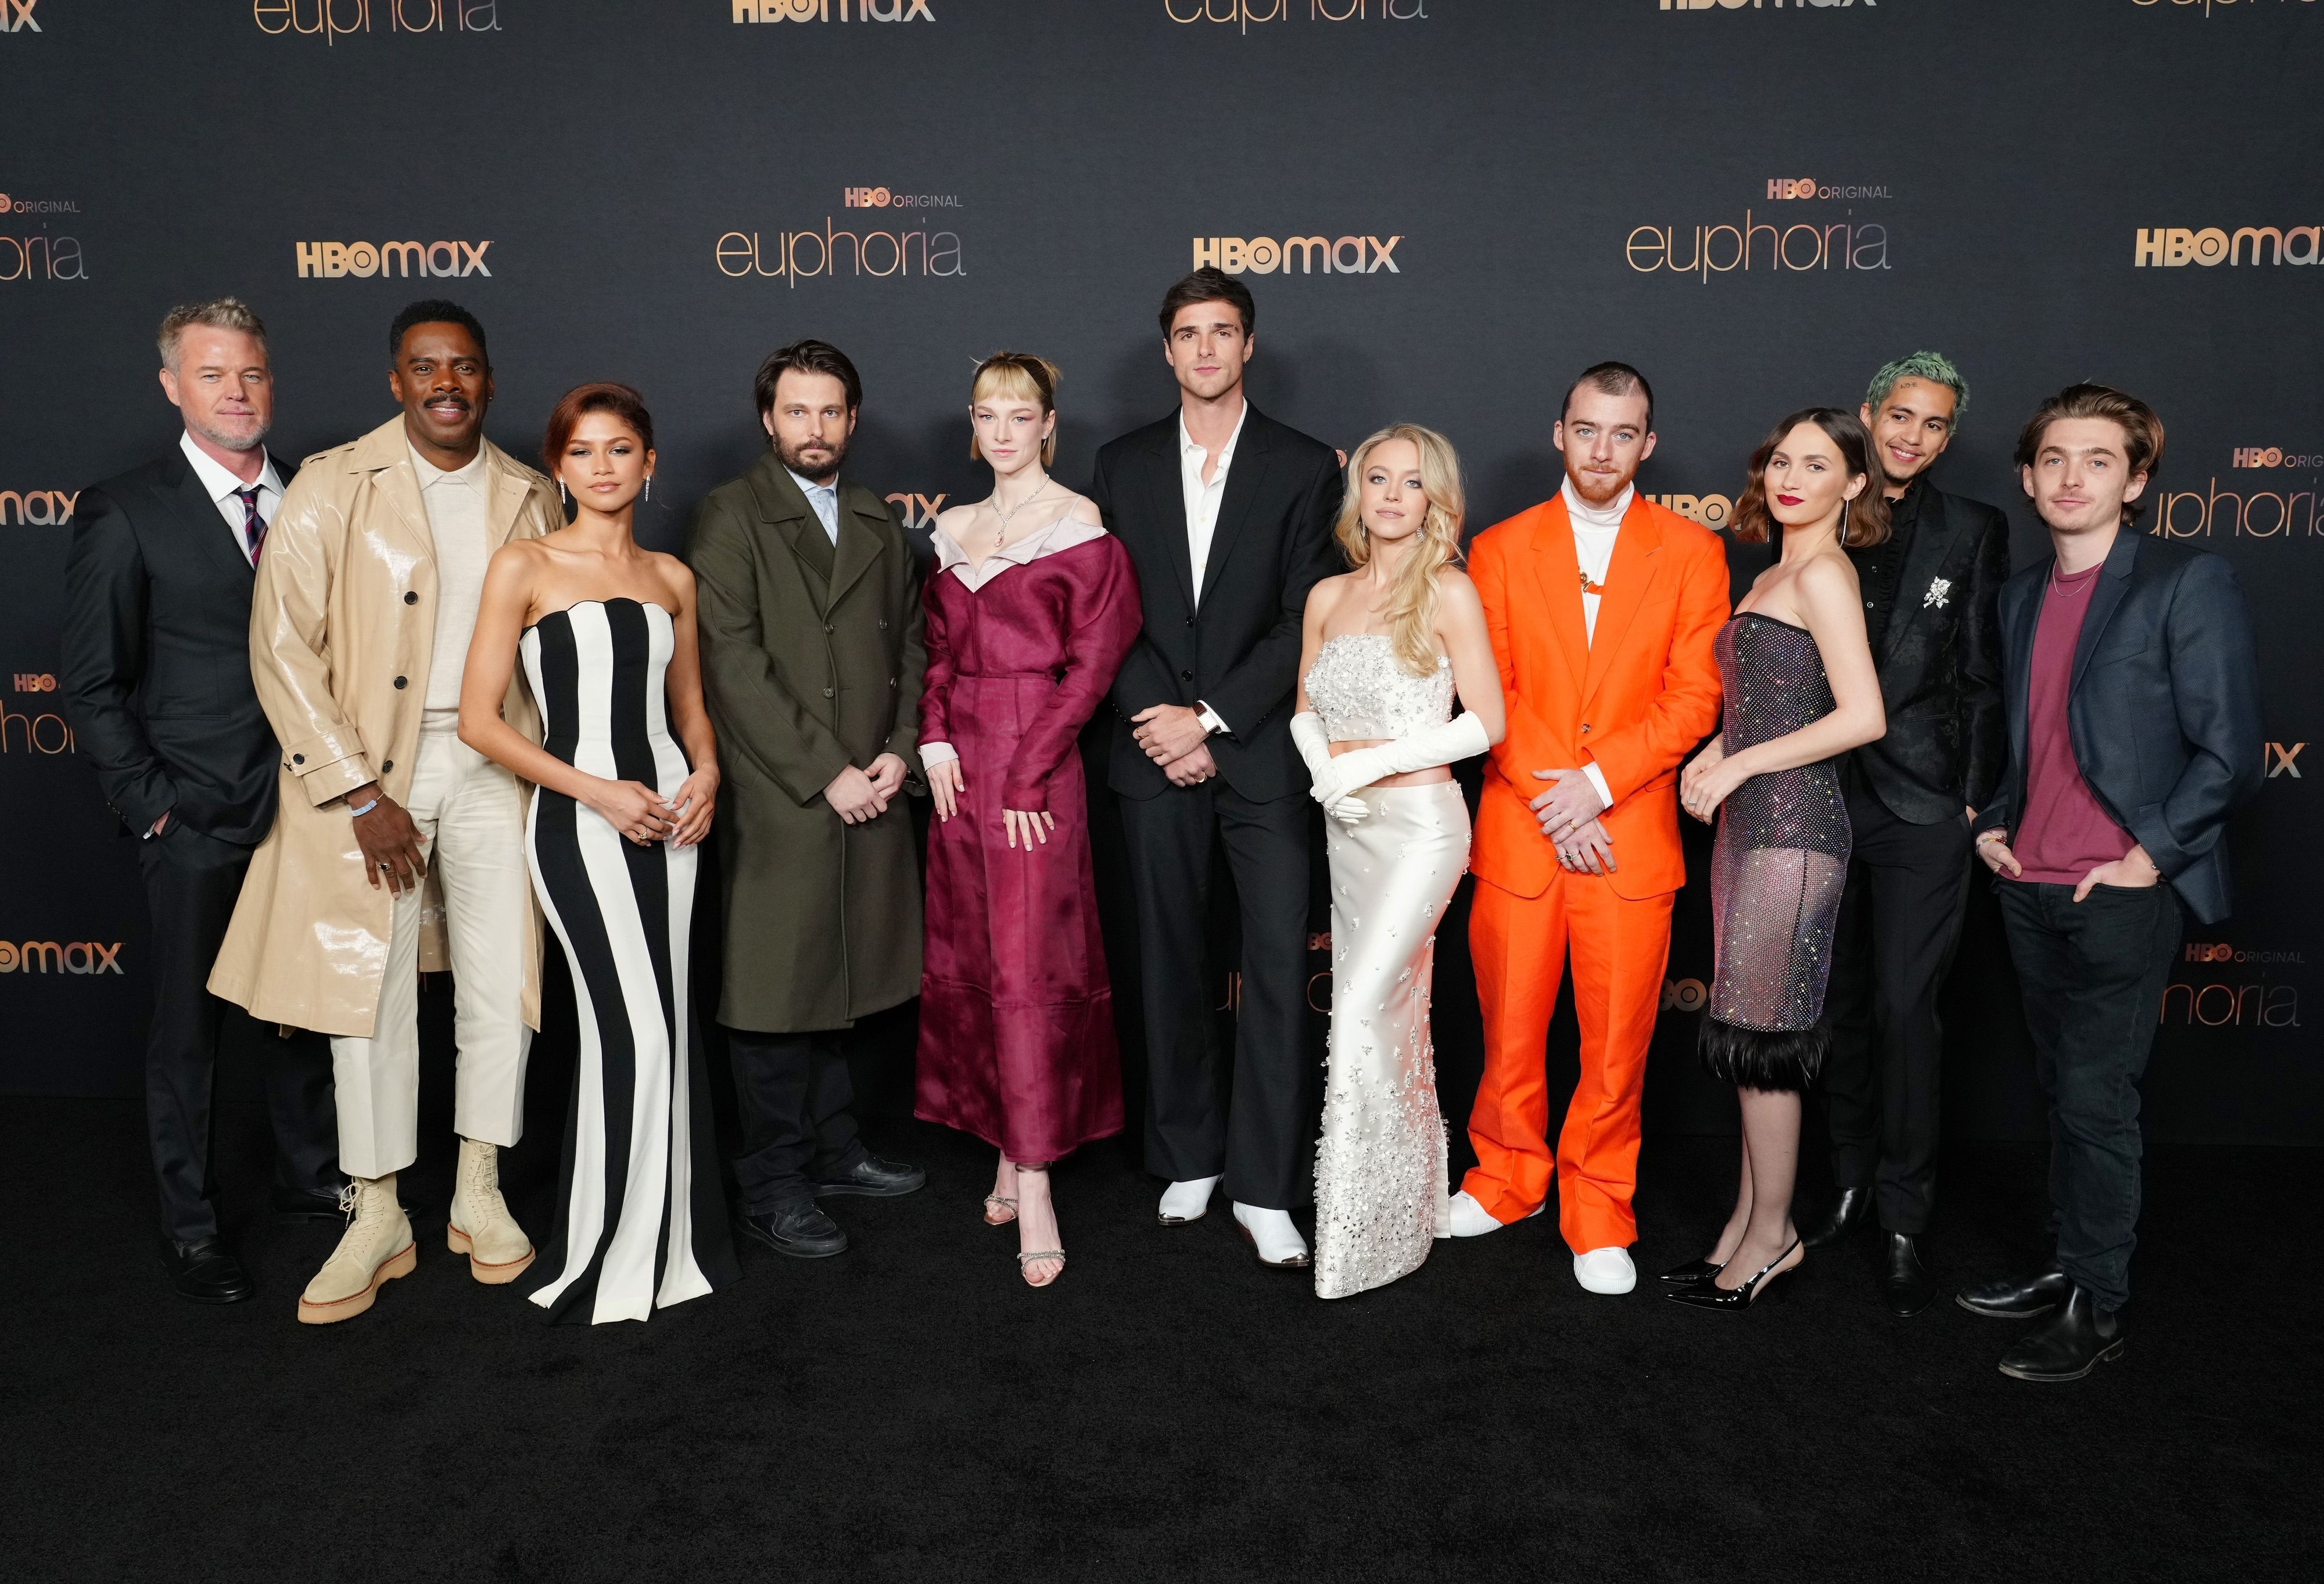 Group of cast members from &quot;Euphoria,&quot; standing together in formal attire on a black carpet before a promotional backdrop